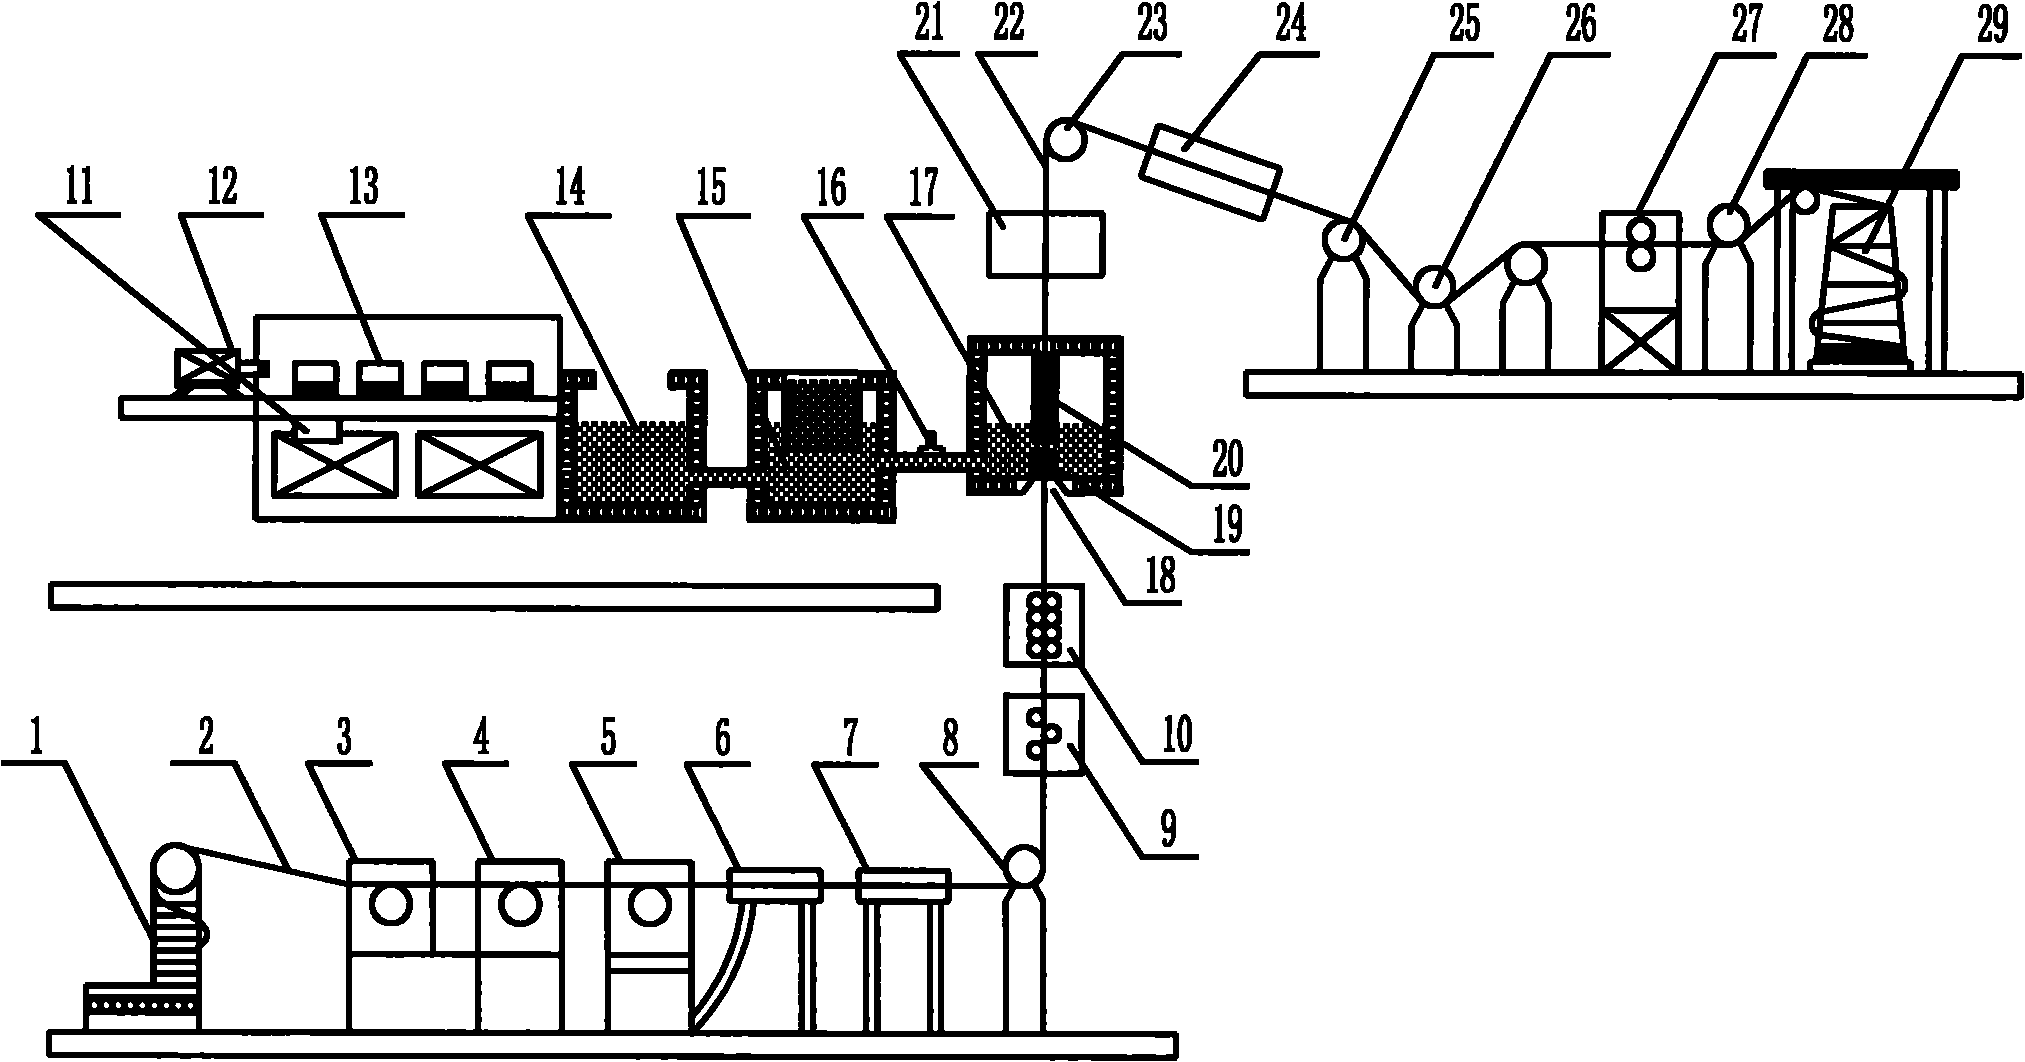 Method and device for continuous up-casting of copper-clad steel